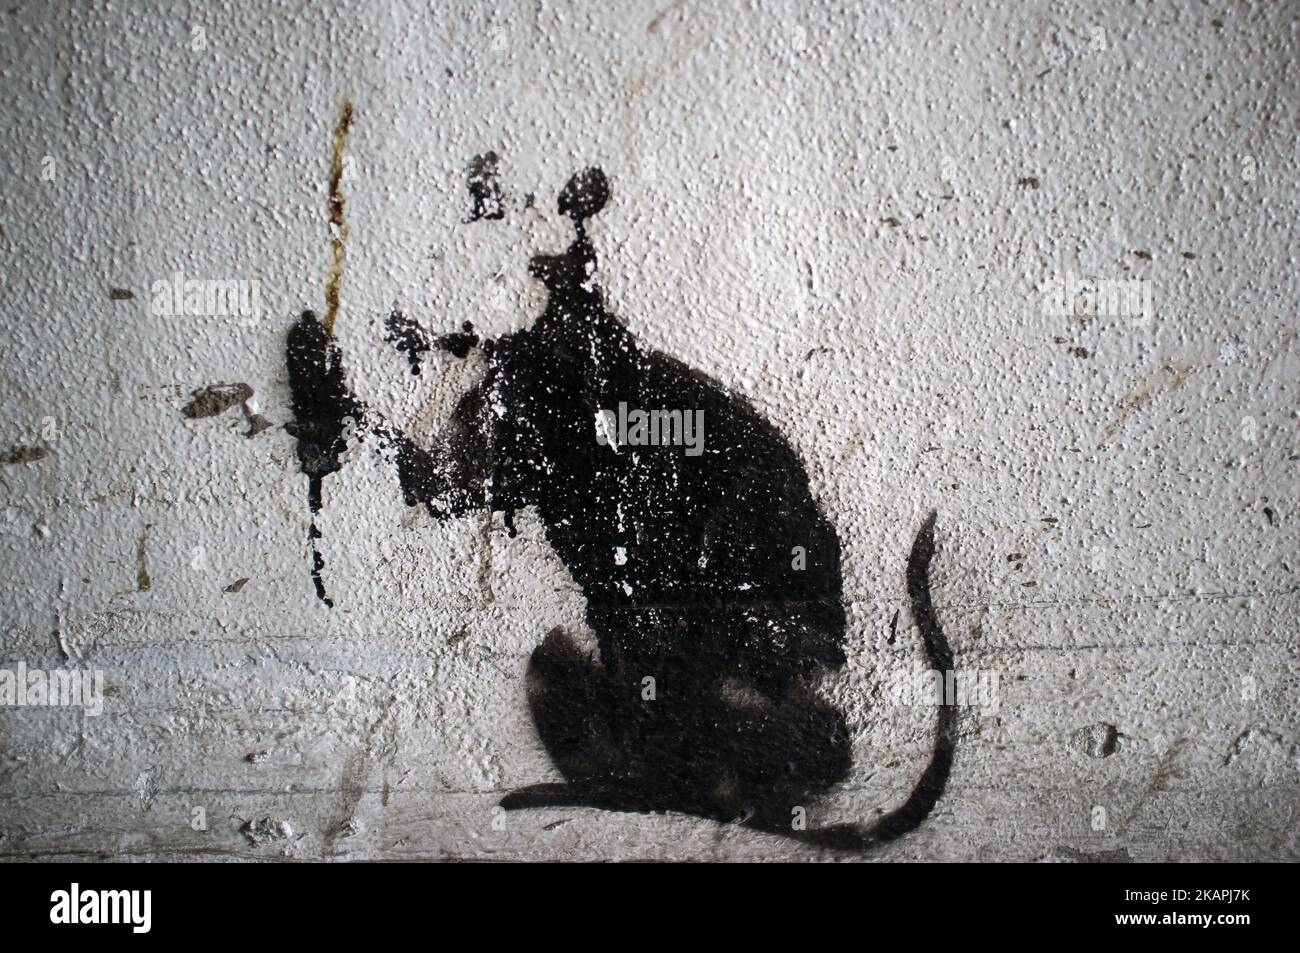 British iconic artist Banky's 'Rats' are seen across Central London, UK on August 12, 2017. Banksy is an anonymous England-based graffiti artist, political activist and film director of unverified identity. Their satirical street art and subversive epigrams combine dark humor with graffiti executed in a distinctive stenciling technique. Banksy's works of political and social commentary have been featured on streets, walls, and bridges of cities throughout the world. (Photo by Alberto Pezzali/NurPhoto) *** Please Use Credit from Credit Field *** Stock Photo